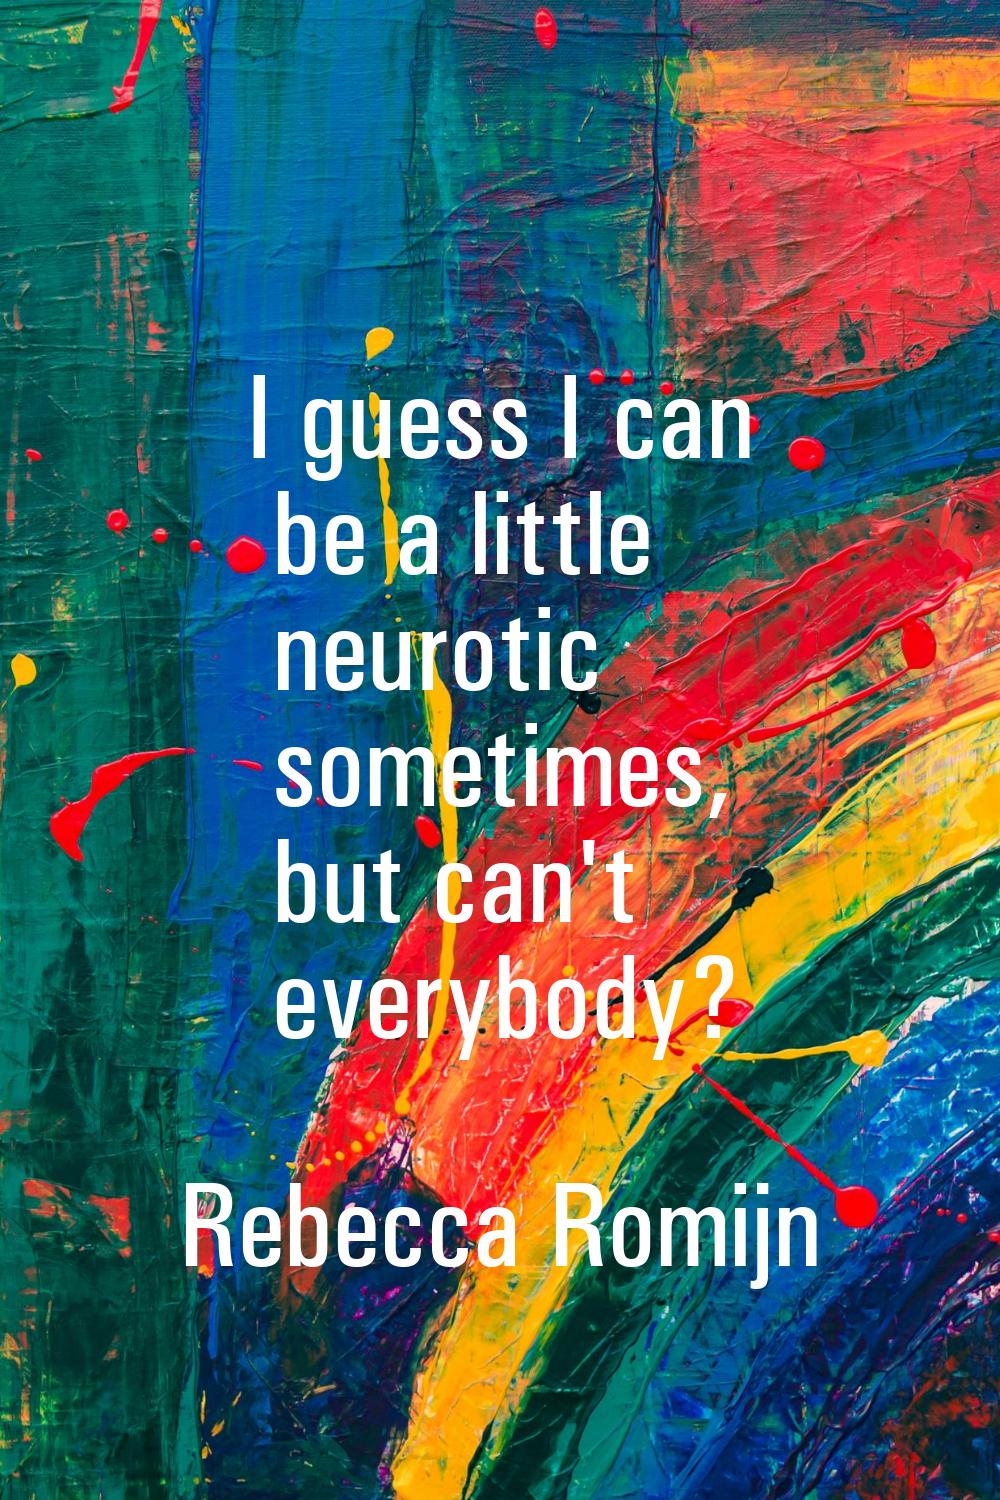 I guess I can be a little neurotic sometimes, but can't everybody?